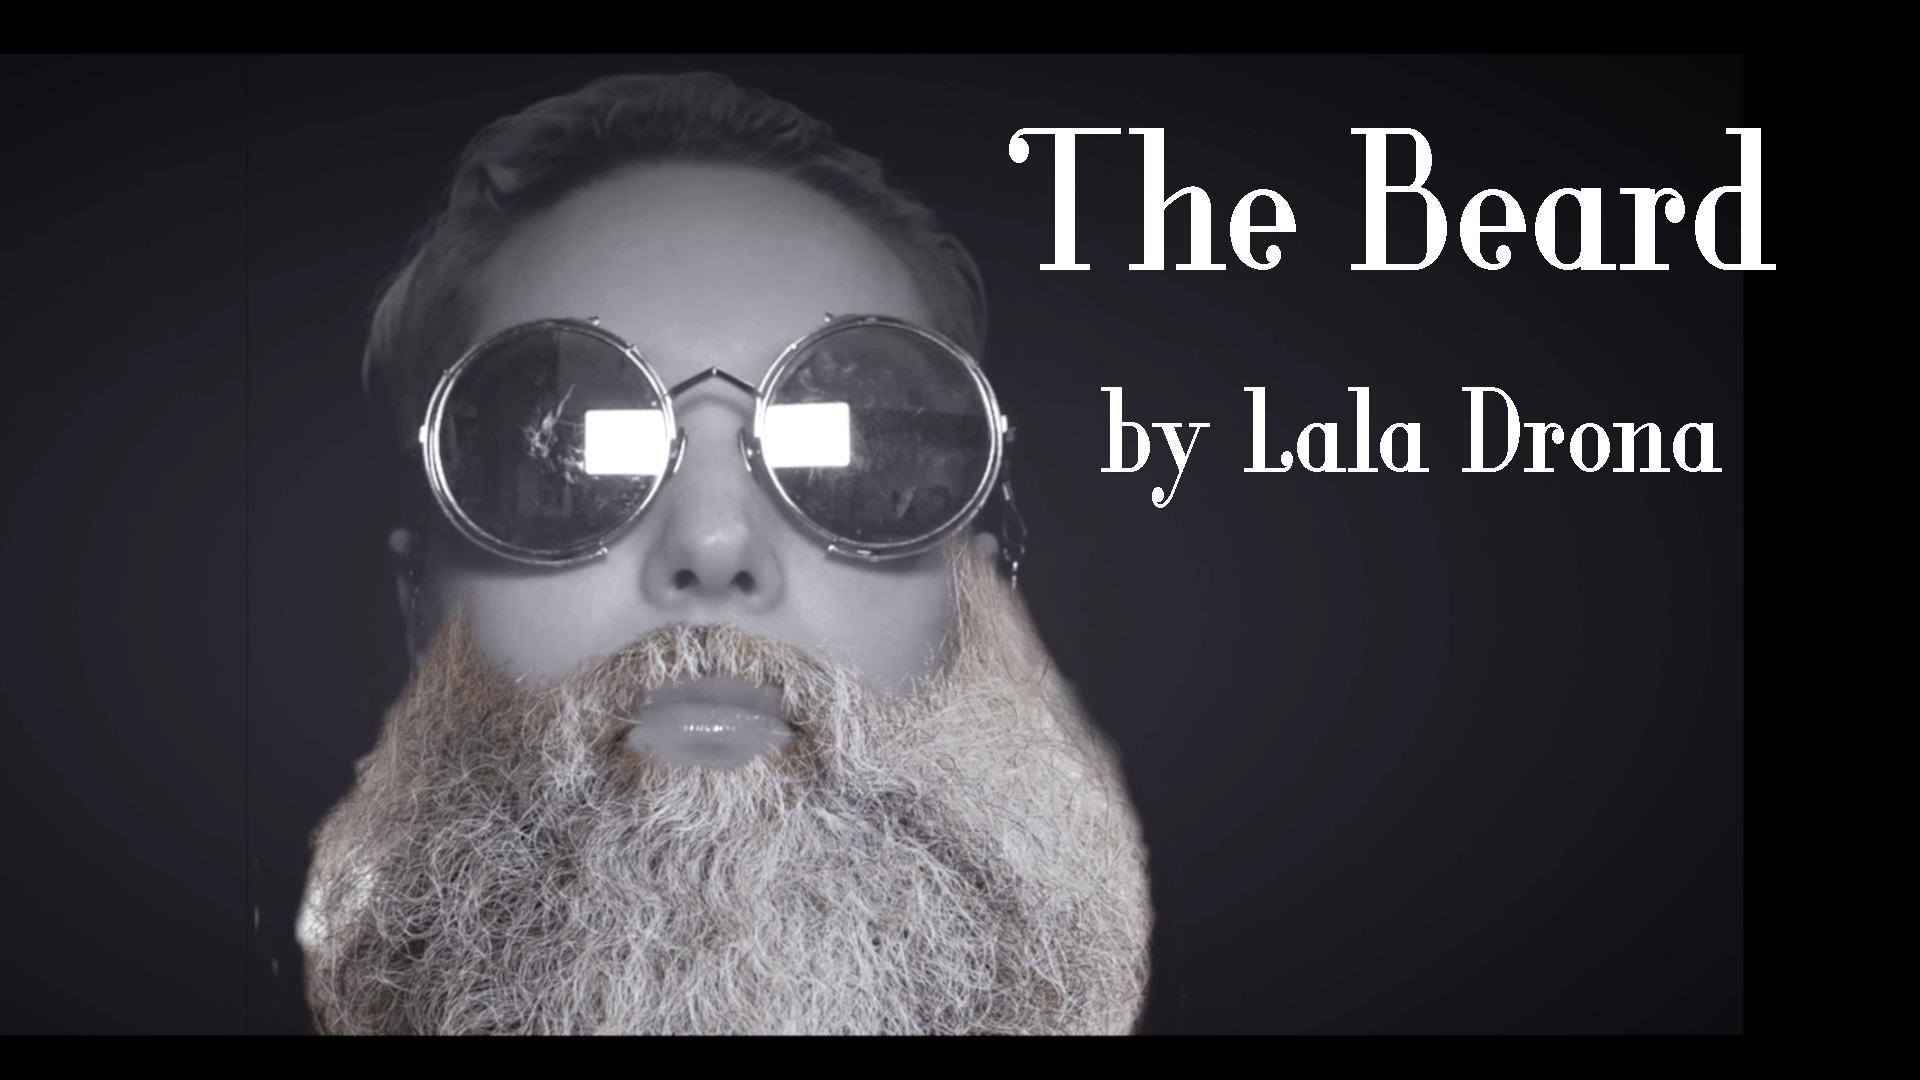 Lala Drona's video "The Beard" from her series La Minute Ladrona.  Explores the the history of the beard and the contemporary and metaphorical beard.